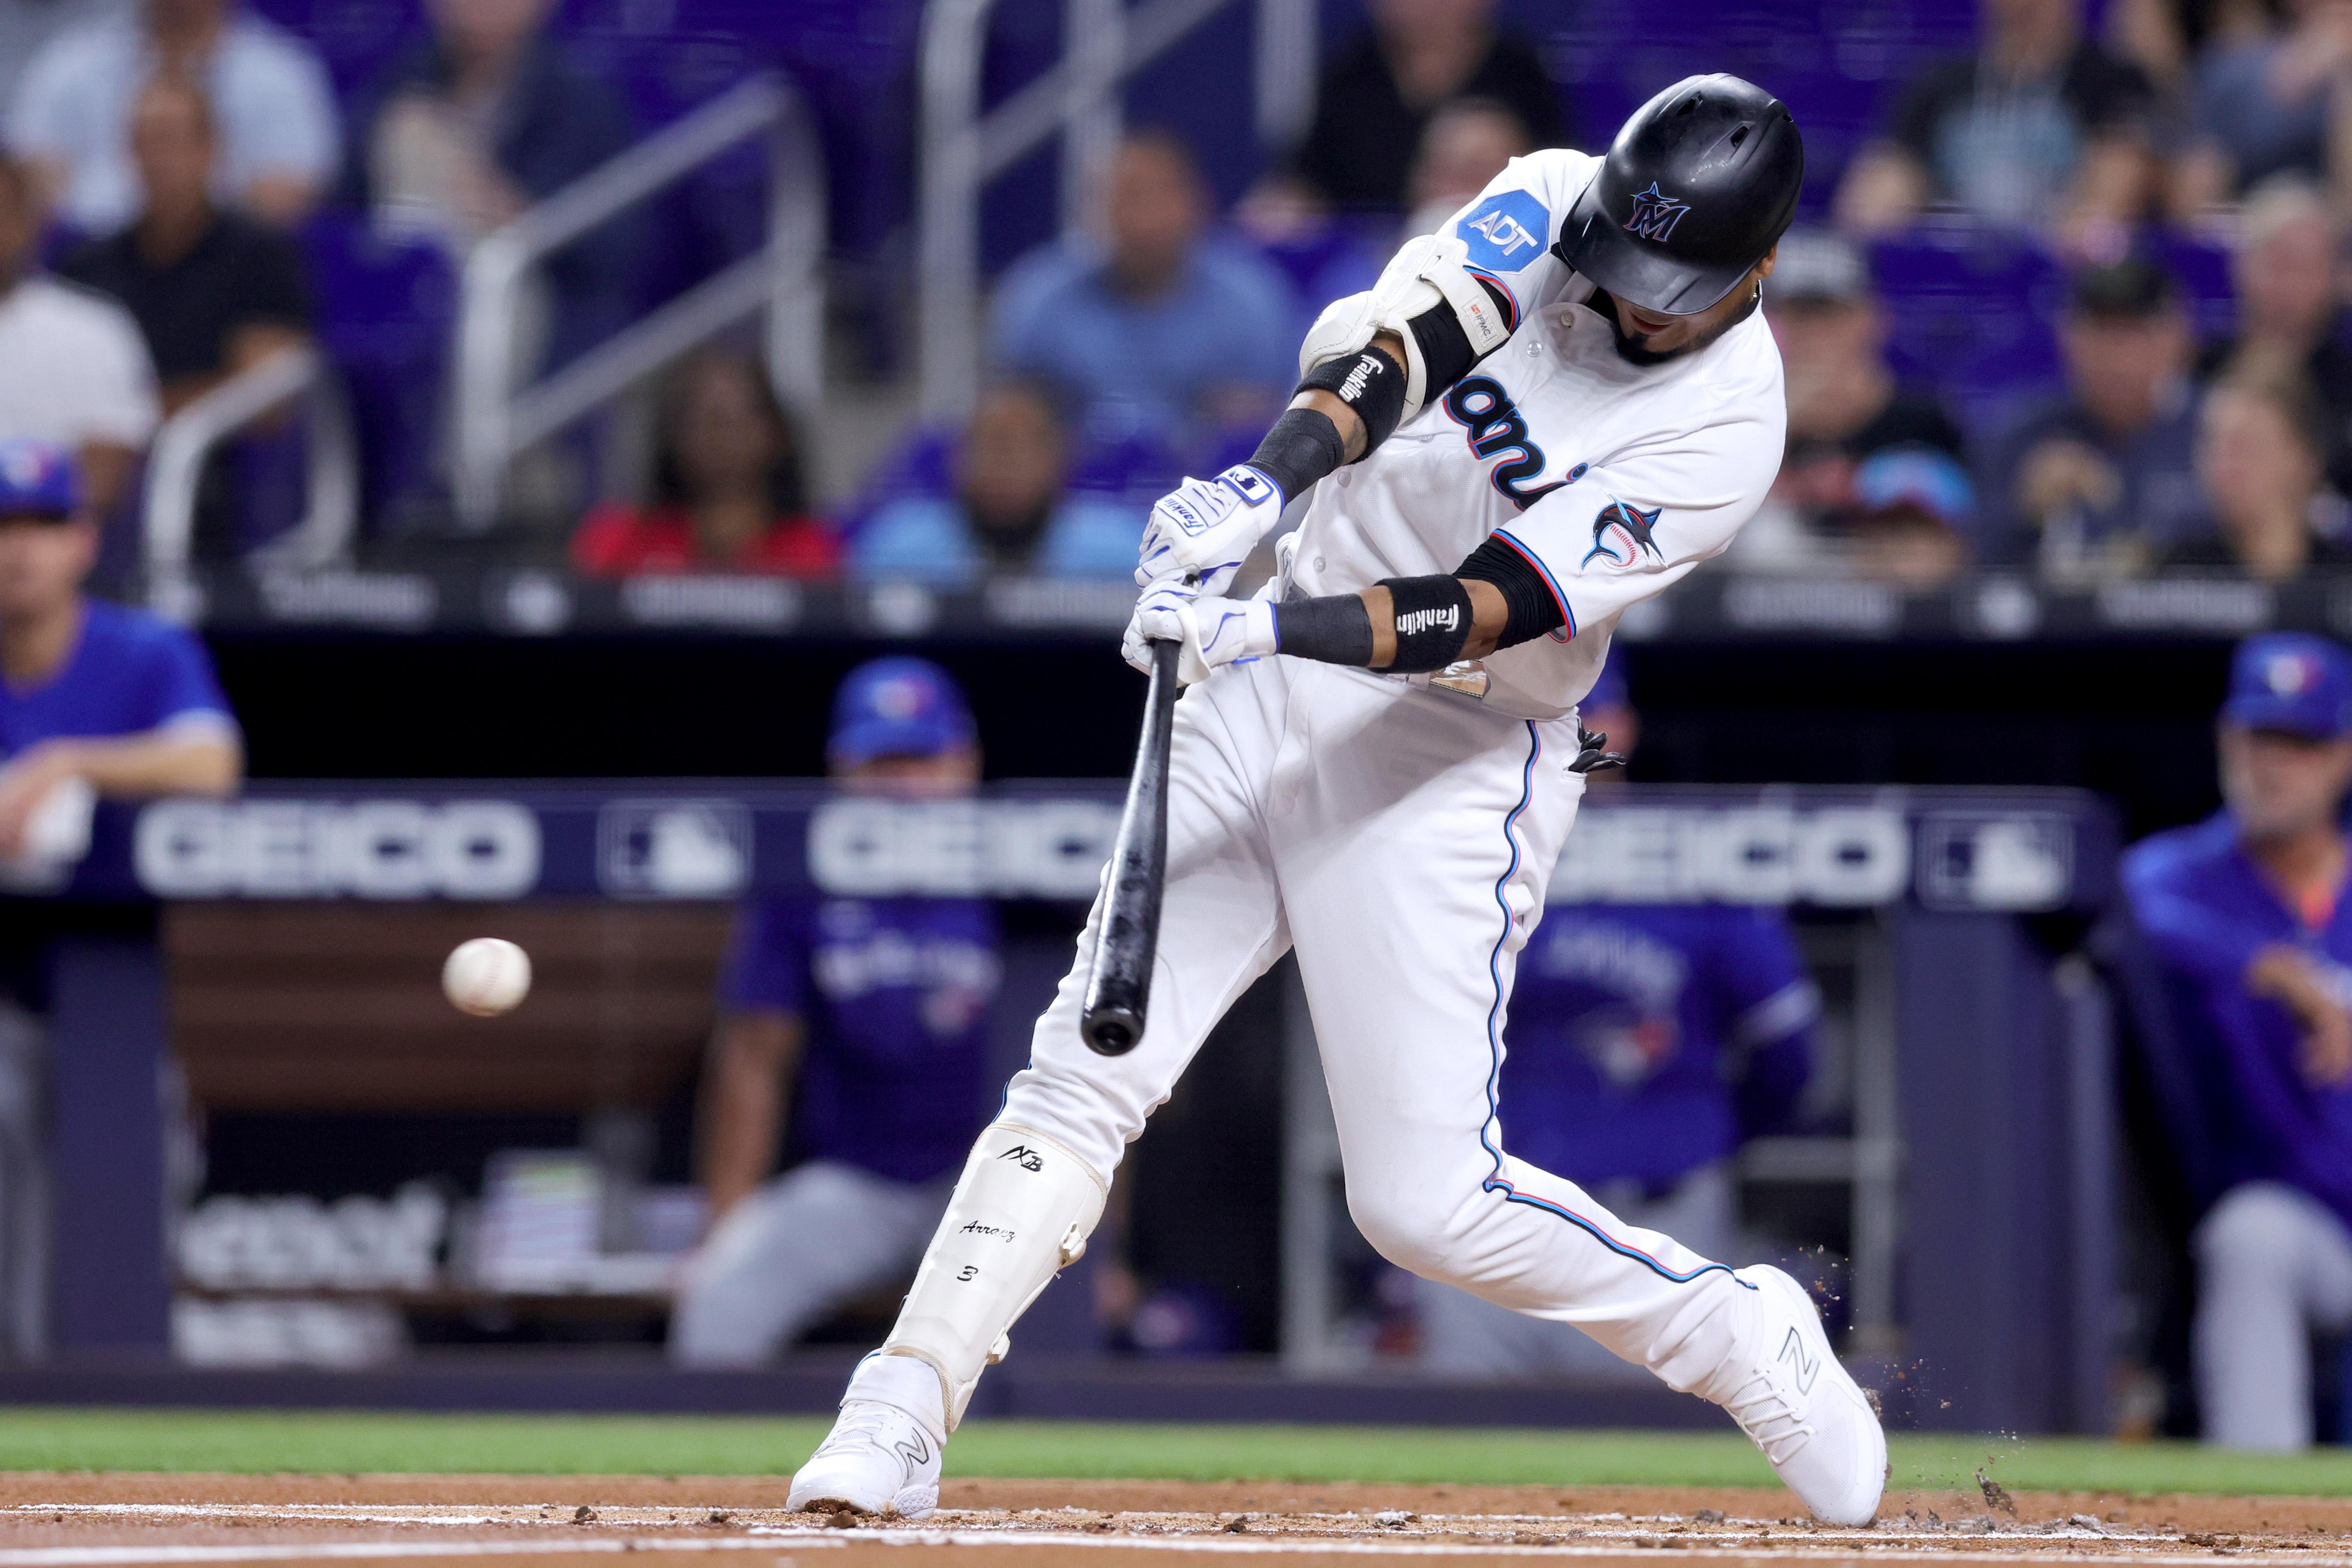 Miami Marlins' Luis Arraez Joins Extremely Rare Club in Hitting History -  Fastball